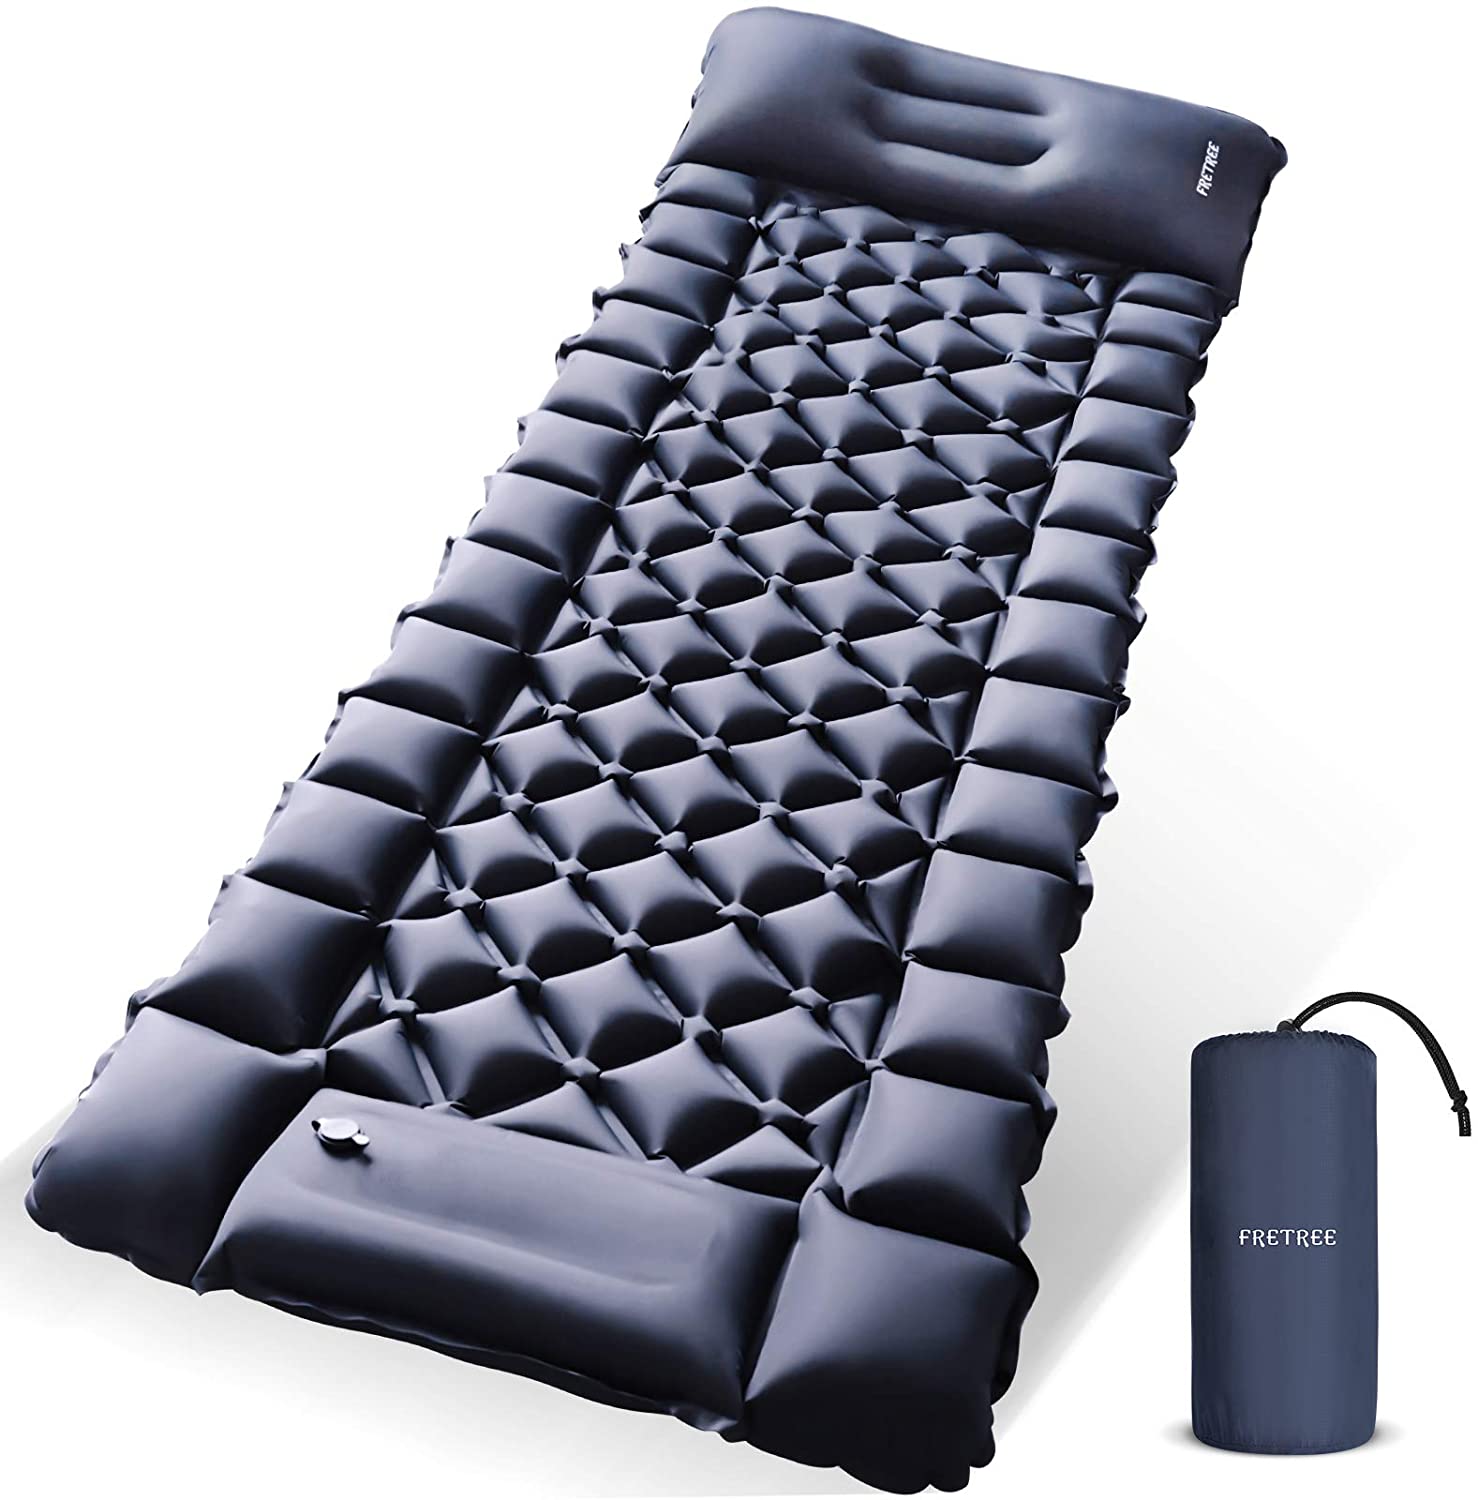 Air beds and mattresses- because there’s no compromising with sleep!